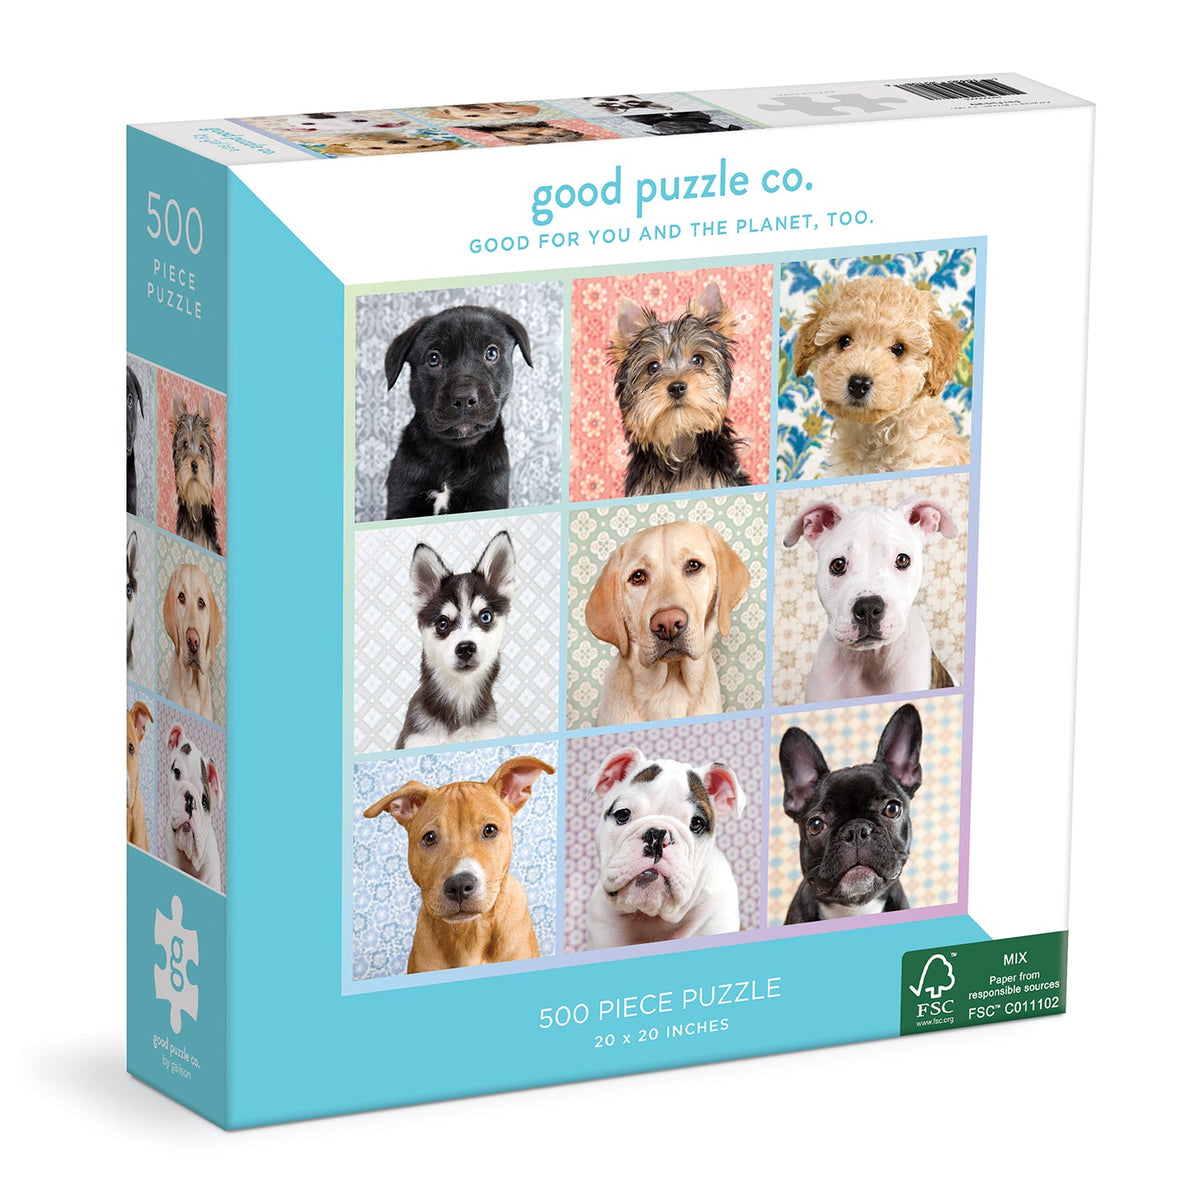 Paper Dogs 750 Piece Shaped Puzzle - Galison